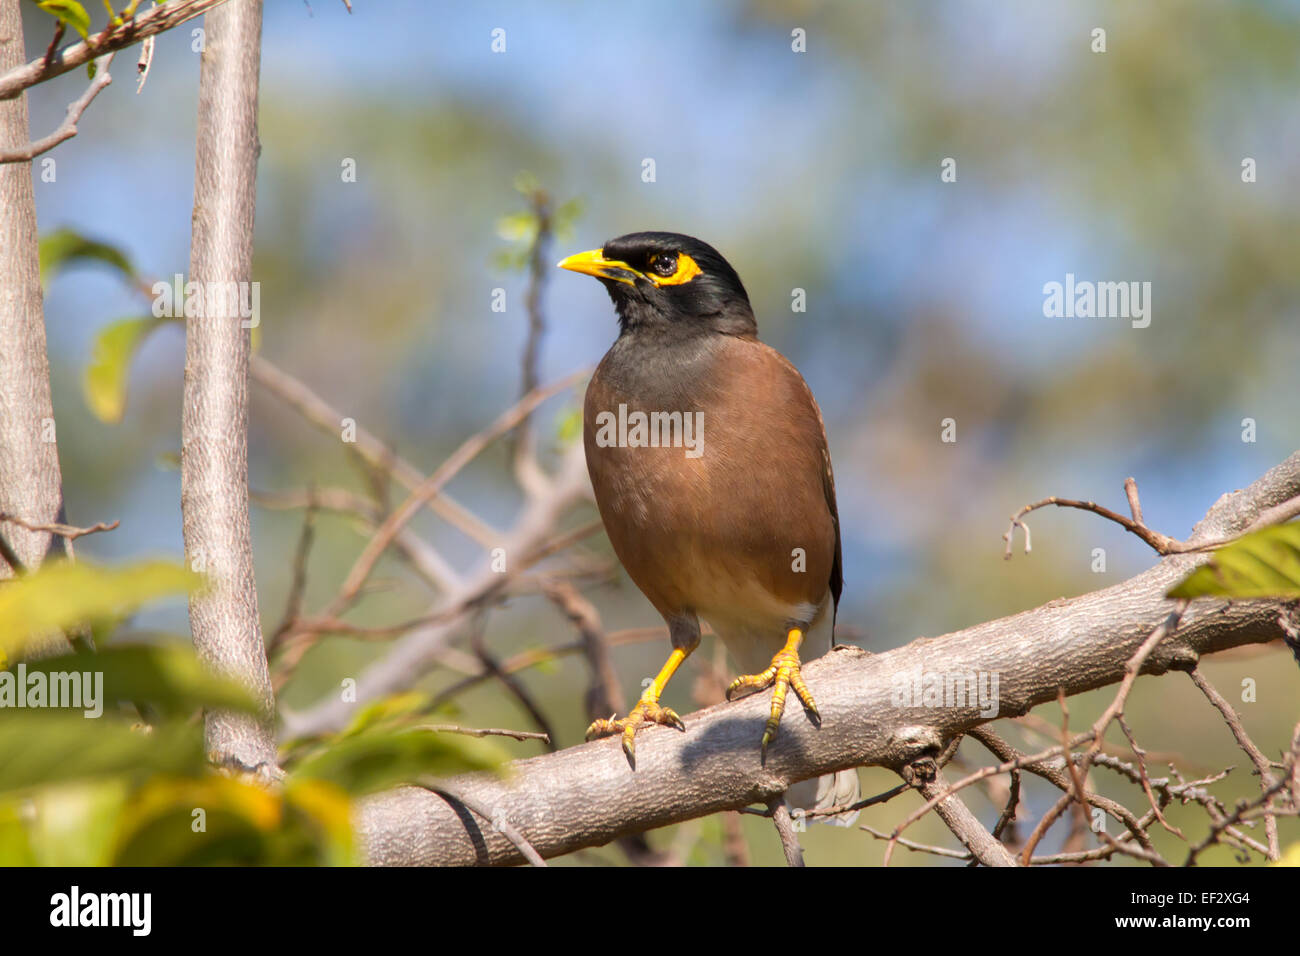 (Acridotheres tristis common myna) perché. Banque D'Images